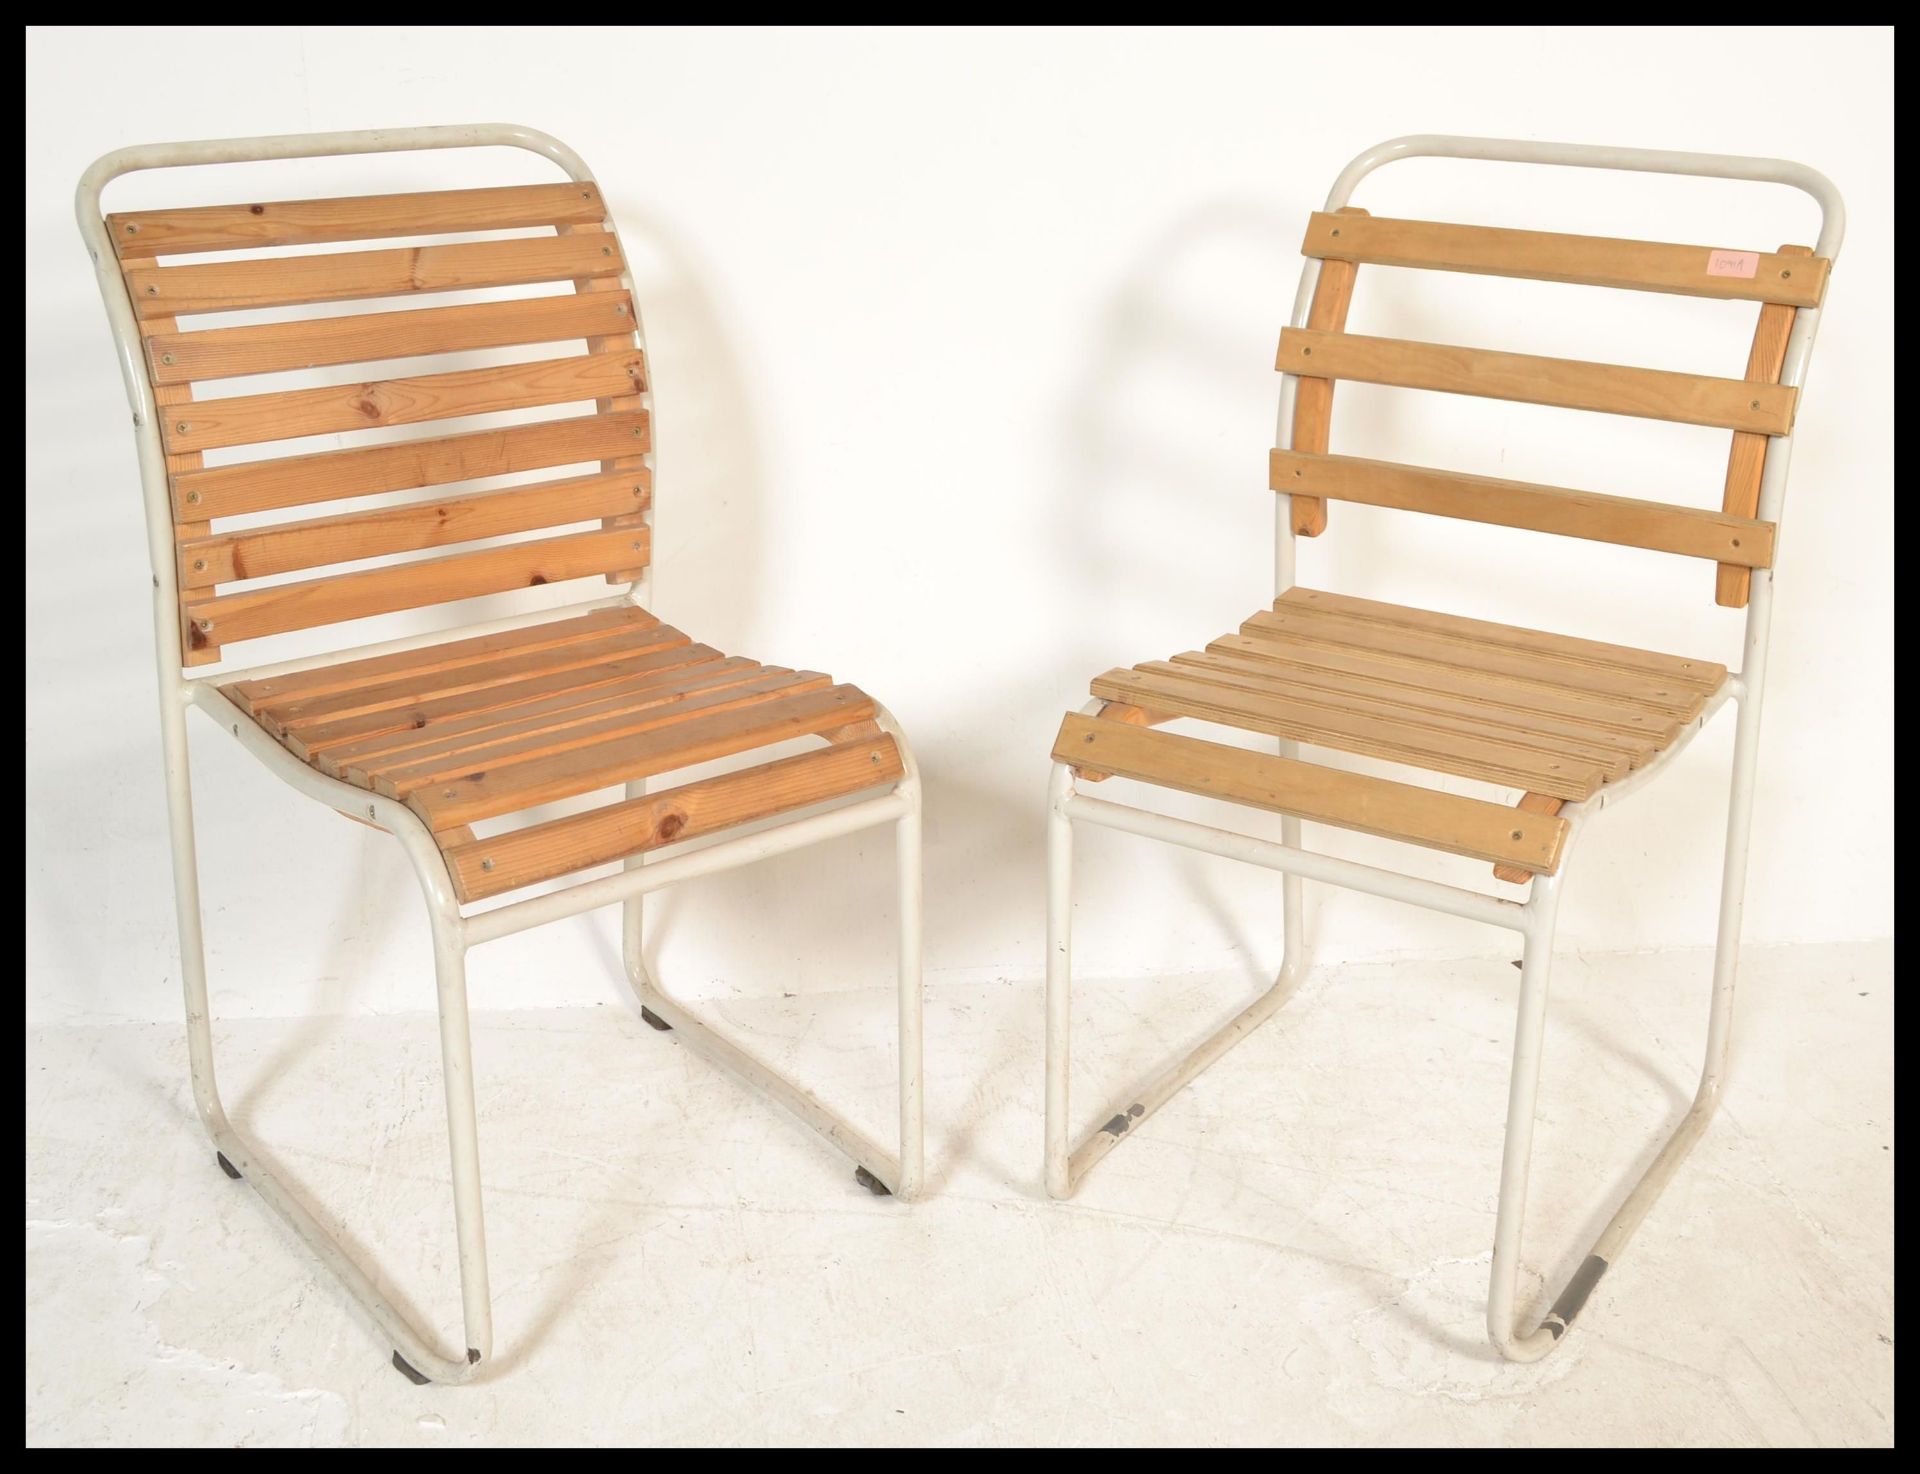 A pair of vintage retro 20th Century stacking chairs having slatted wood seats and backs raised on